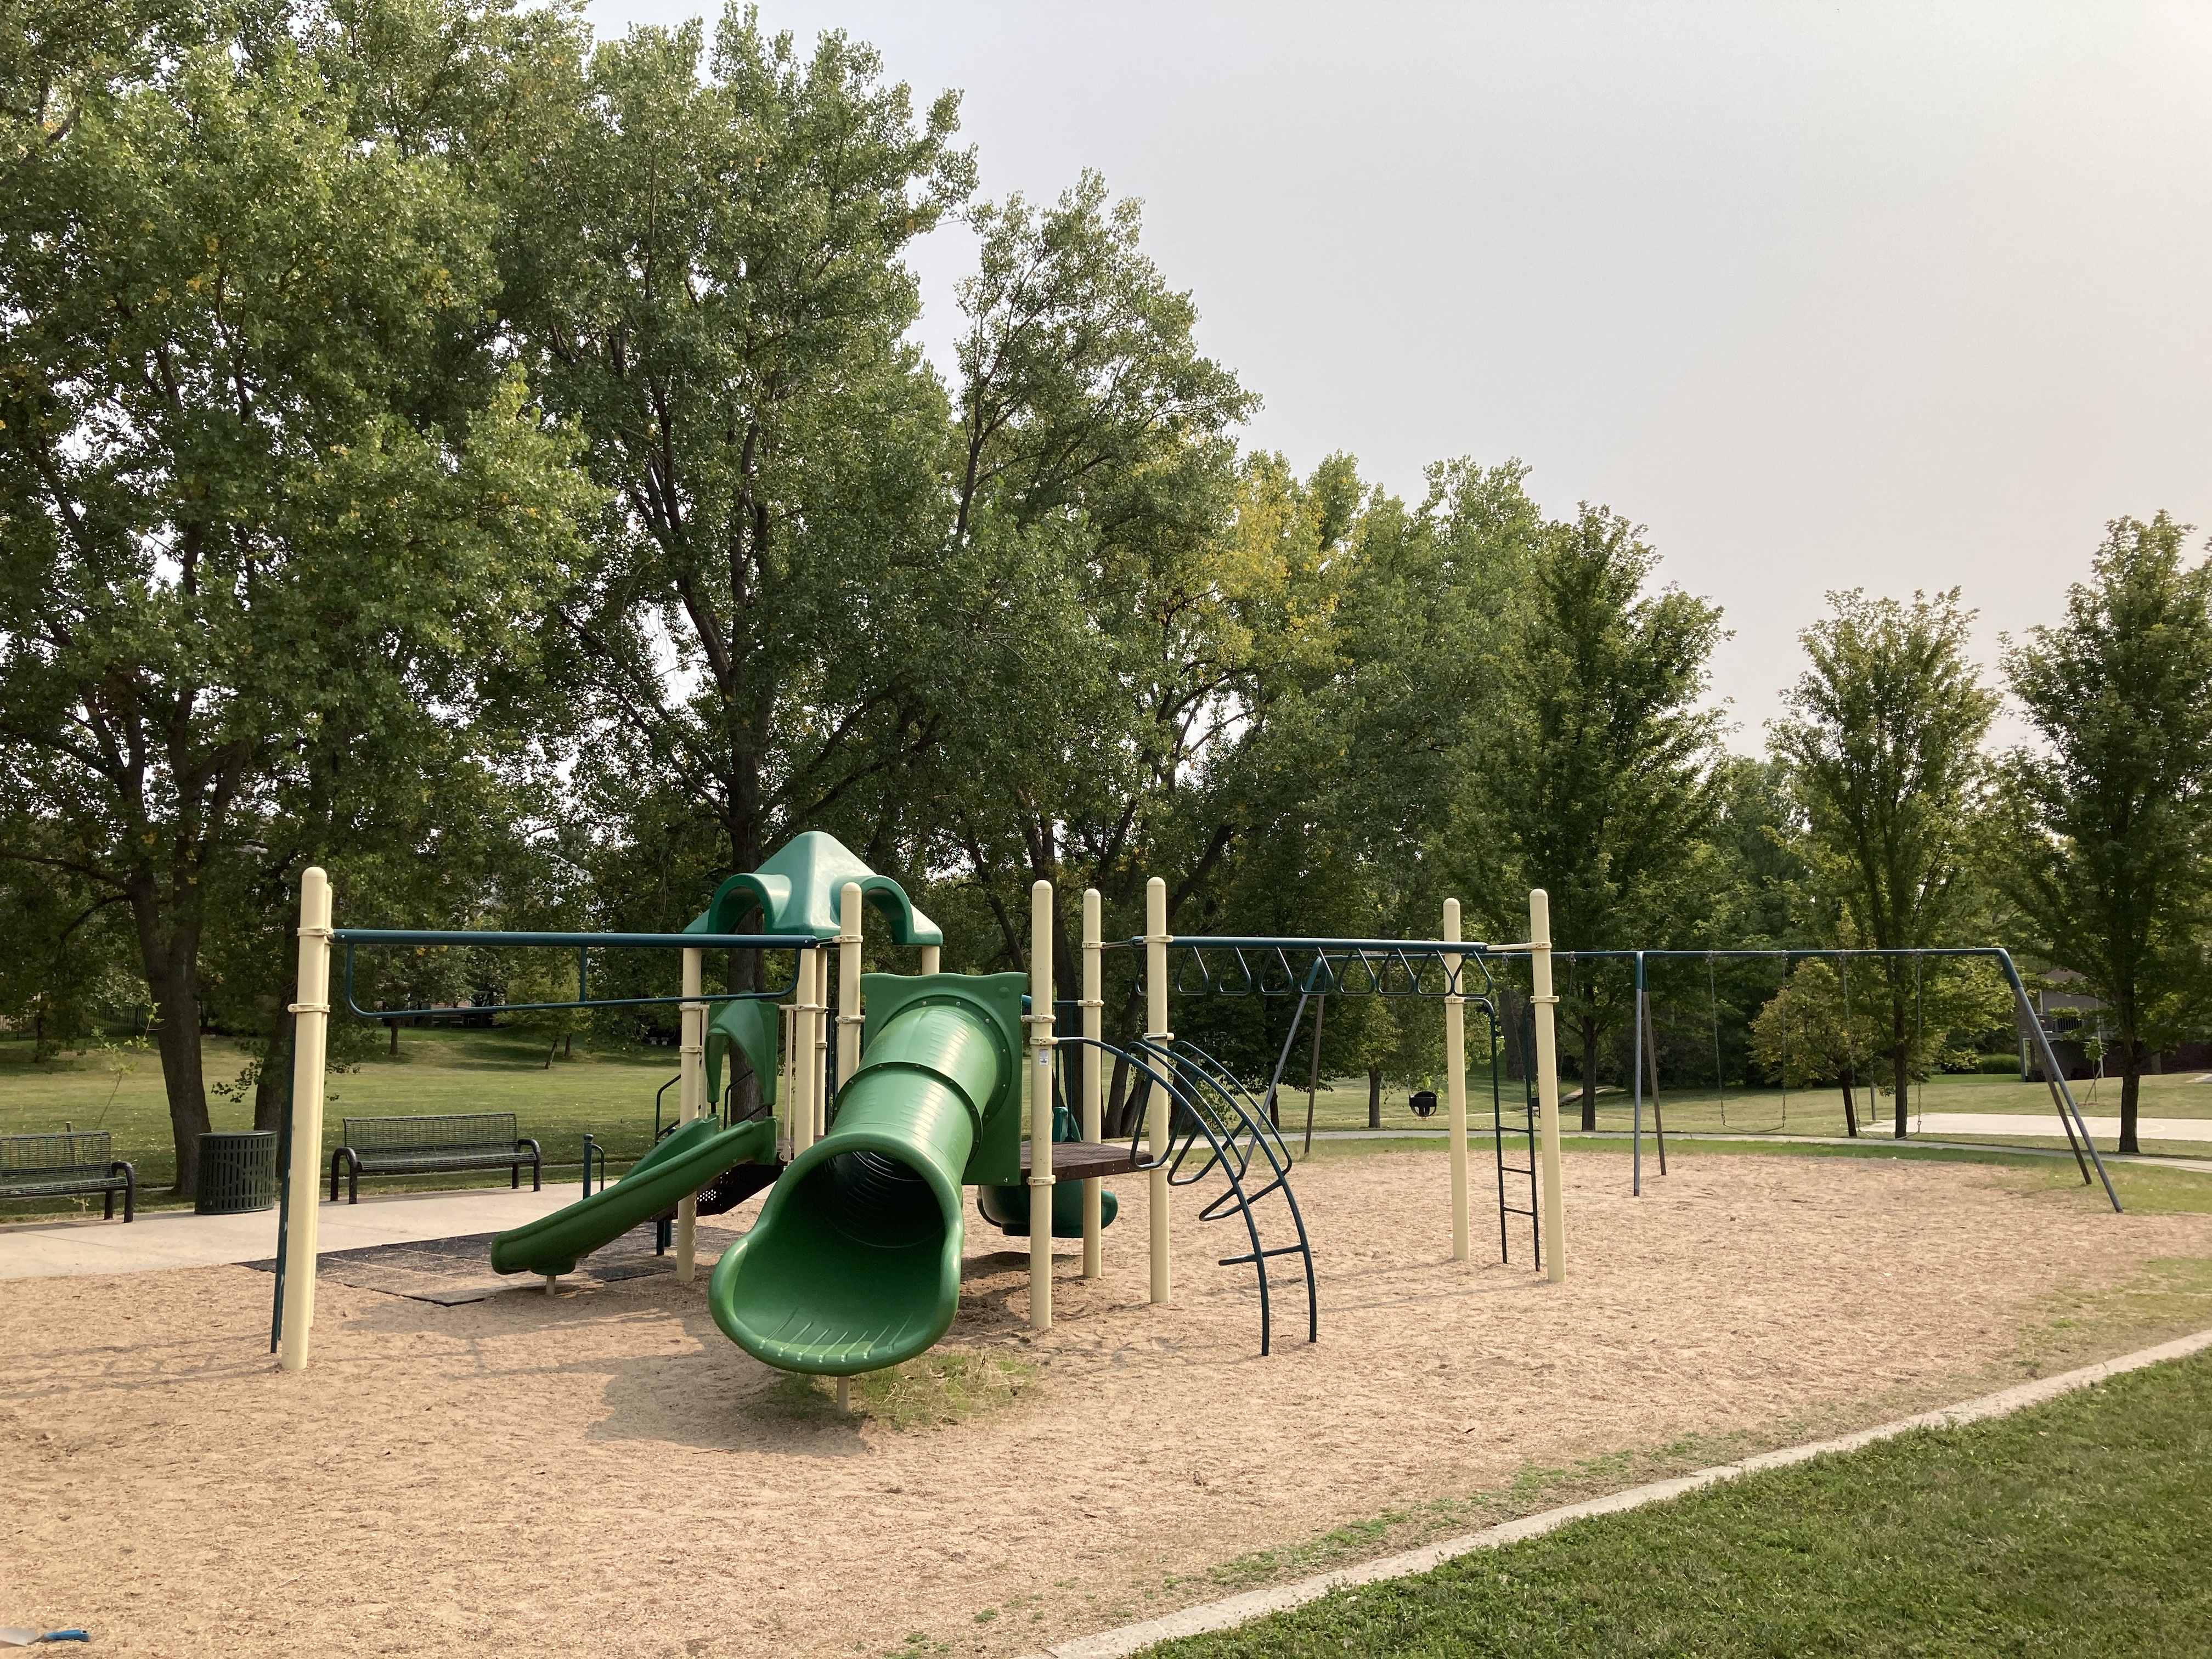 A playground area on sand featuring a multilevel structure with slides and varying climbing elements. There is a separate structure with belt and bucket swings. Benches are located nearby under shade trees. 